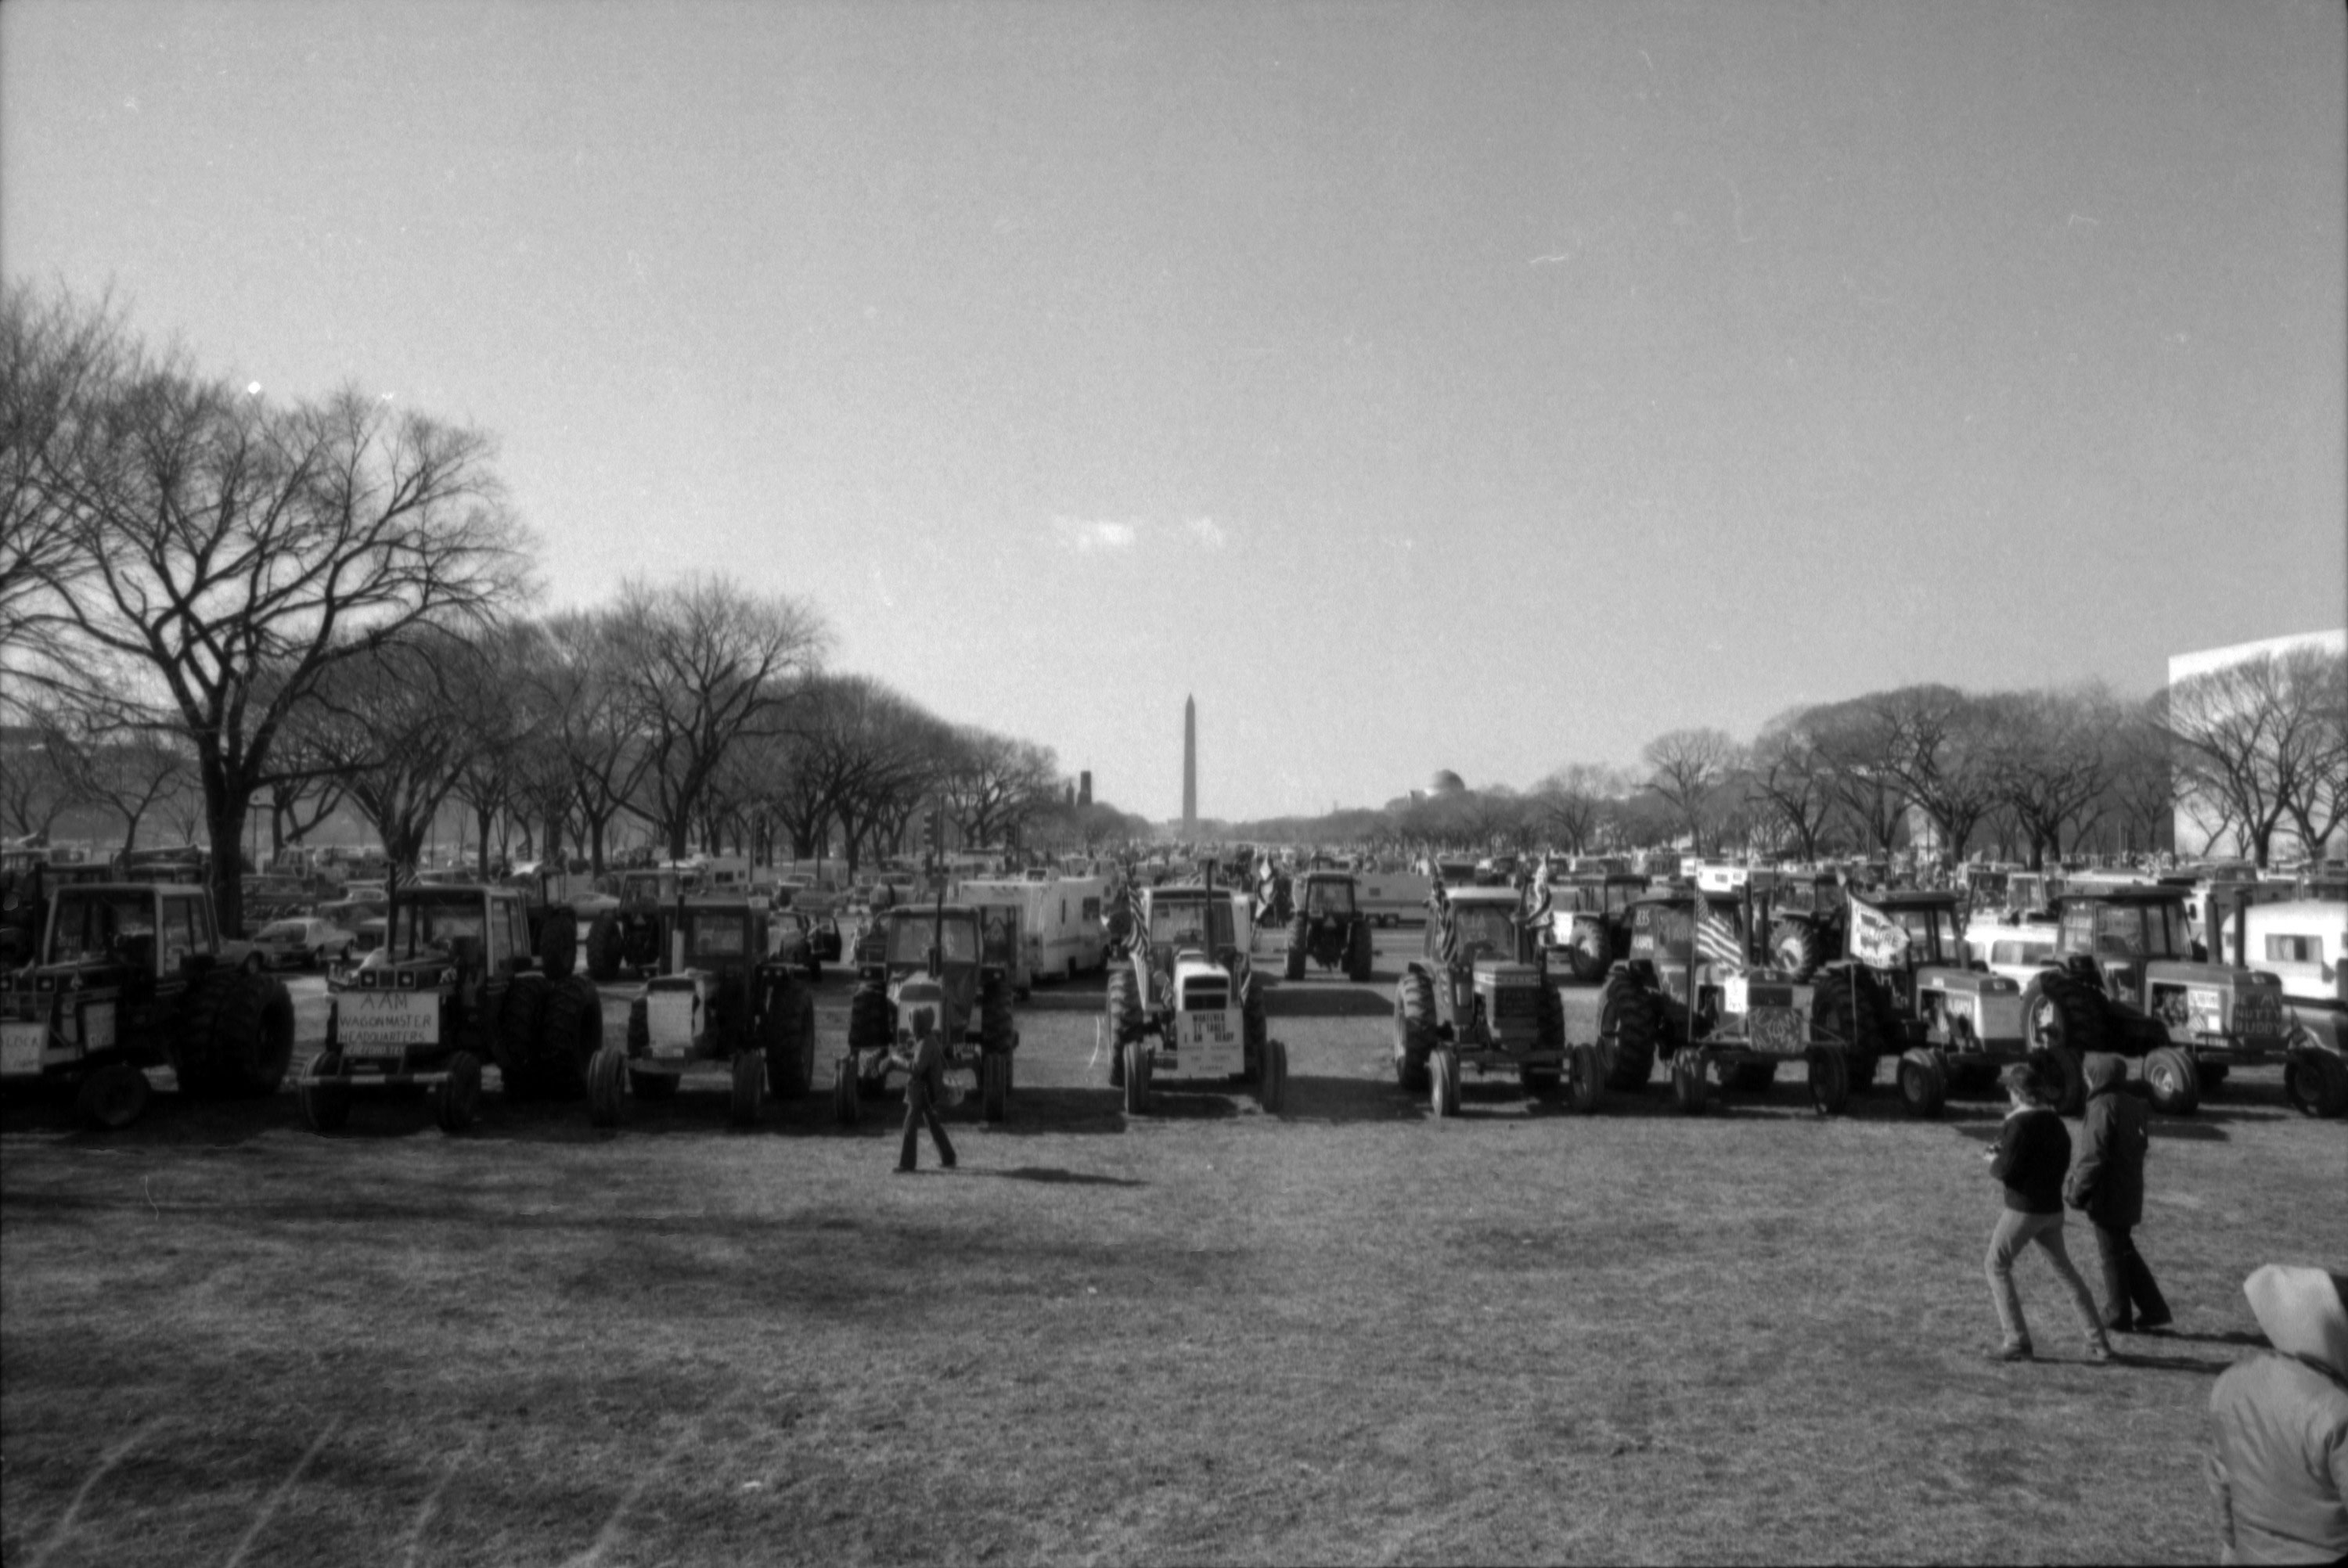 American Agriculture Movement "Tractorcade" on National Mall